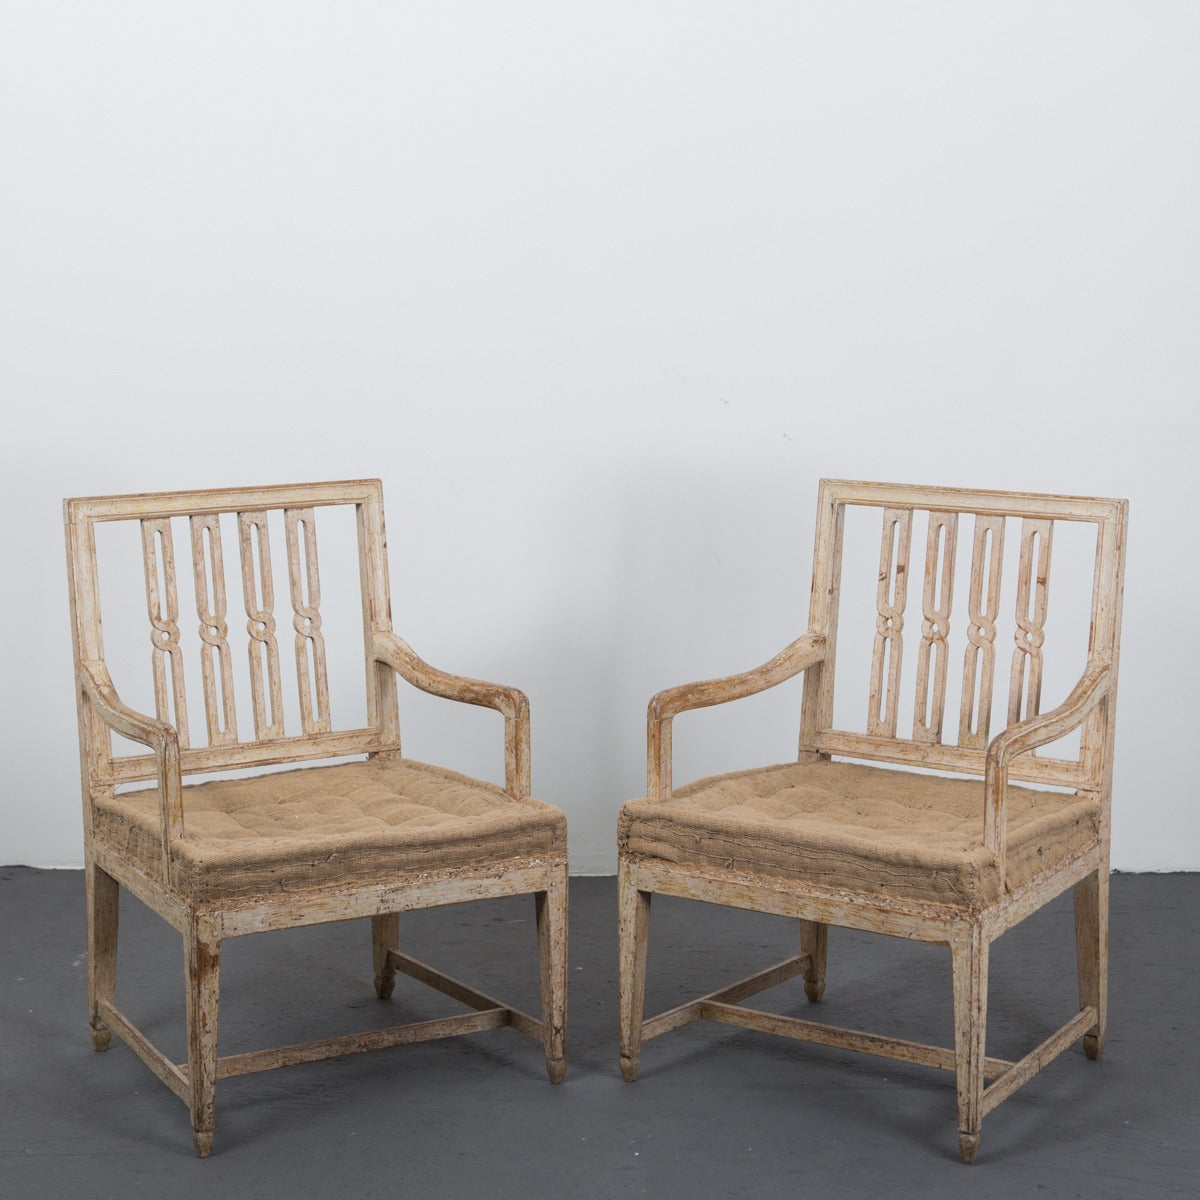 An exquisite pair of Swedish armchair made during the Gustavian period ca 1790. Wide seat and back in all original condition (updated seating). Beautiful original paint with charming patina. Rectangular back splat with twisted grid spindles. Softly